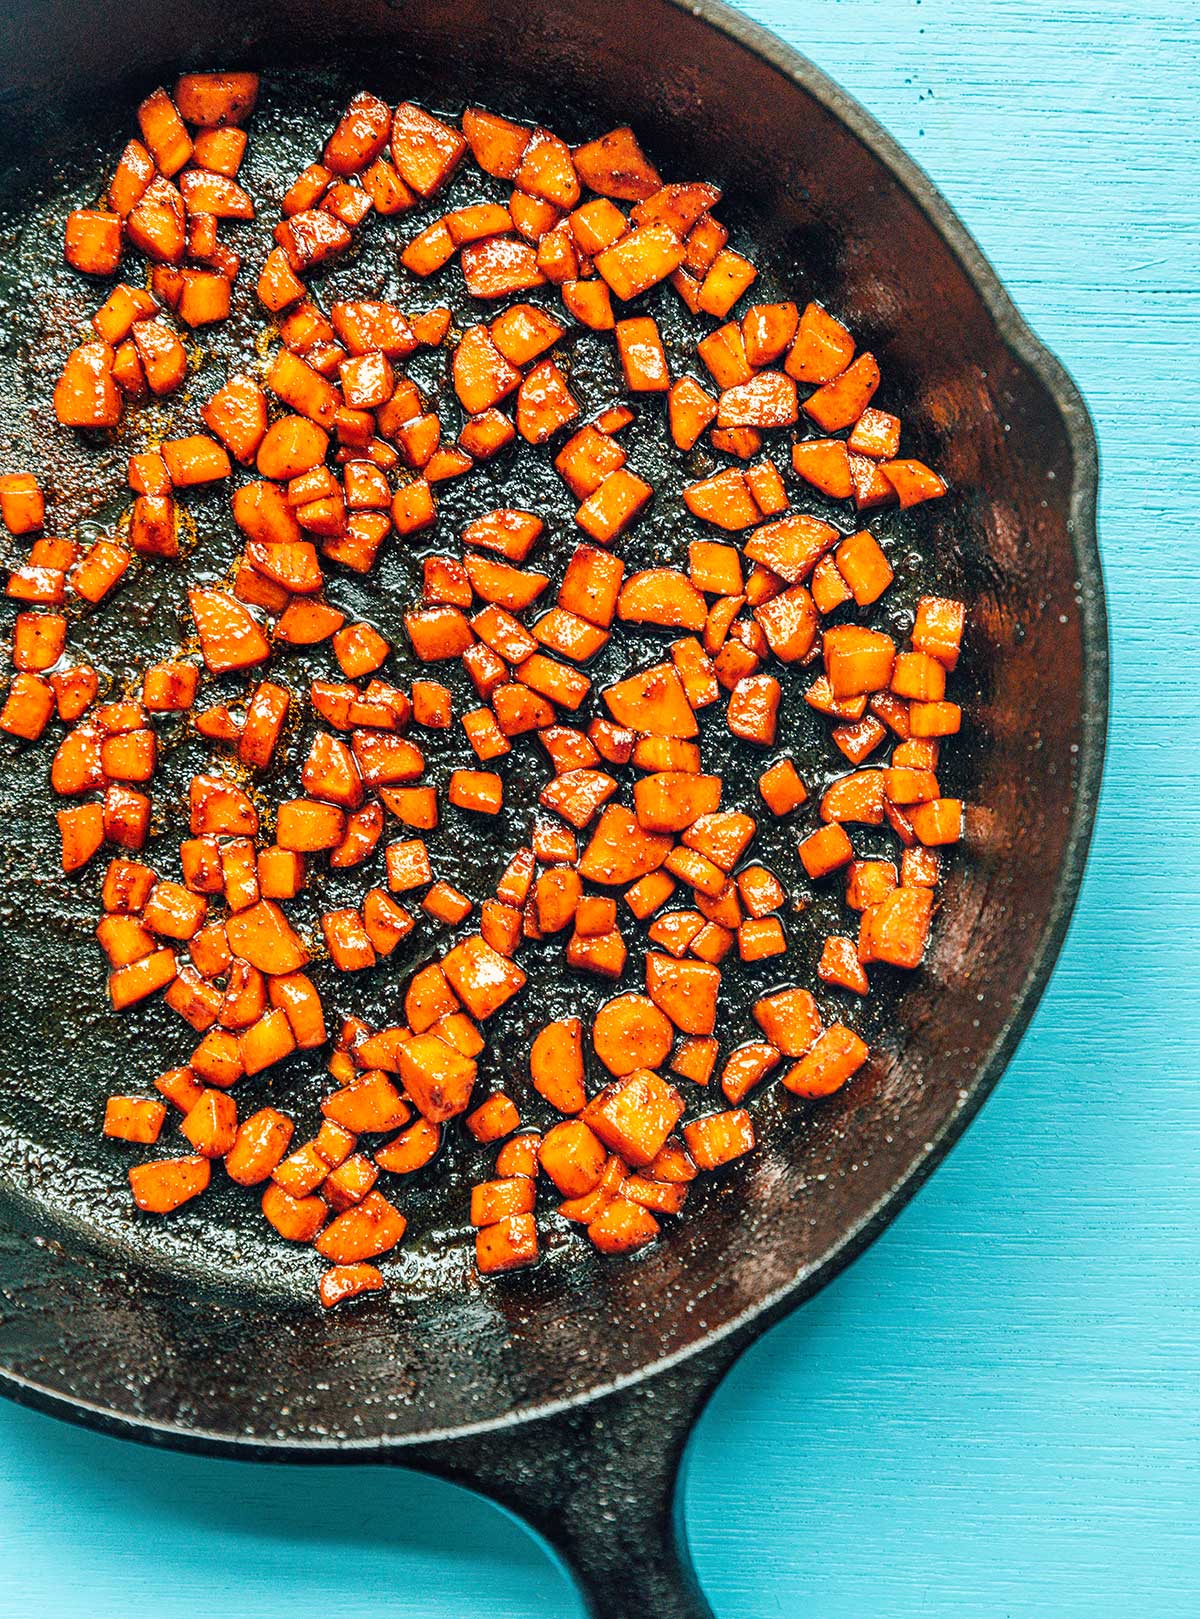 Carrot and brown sugar bacon bits cooking in a cast iron skillet